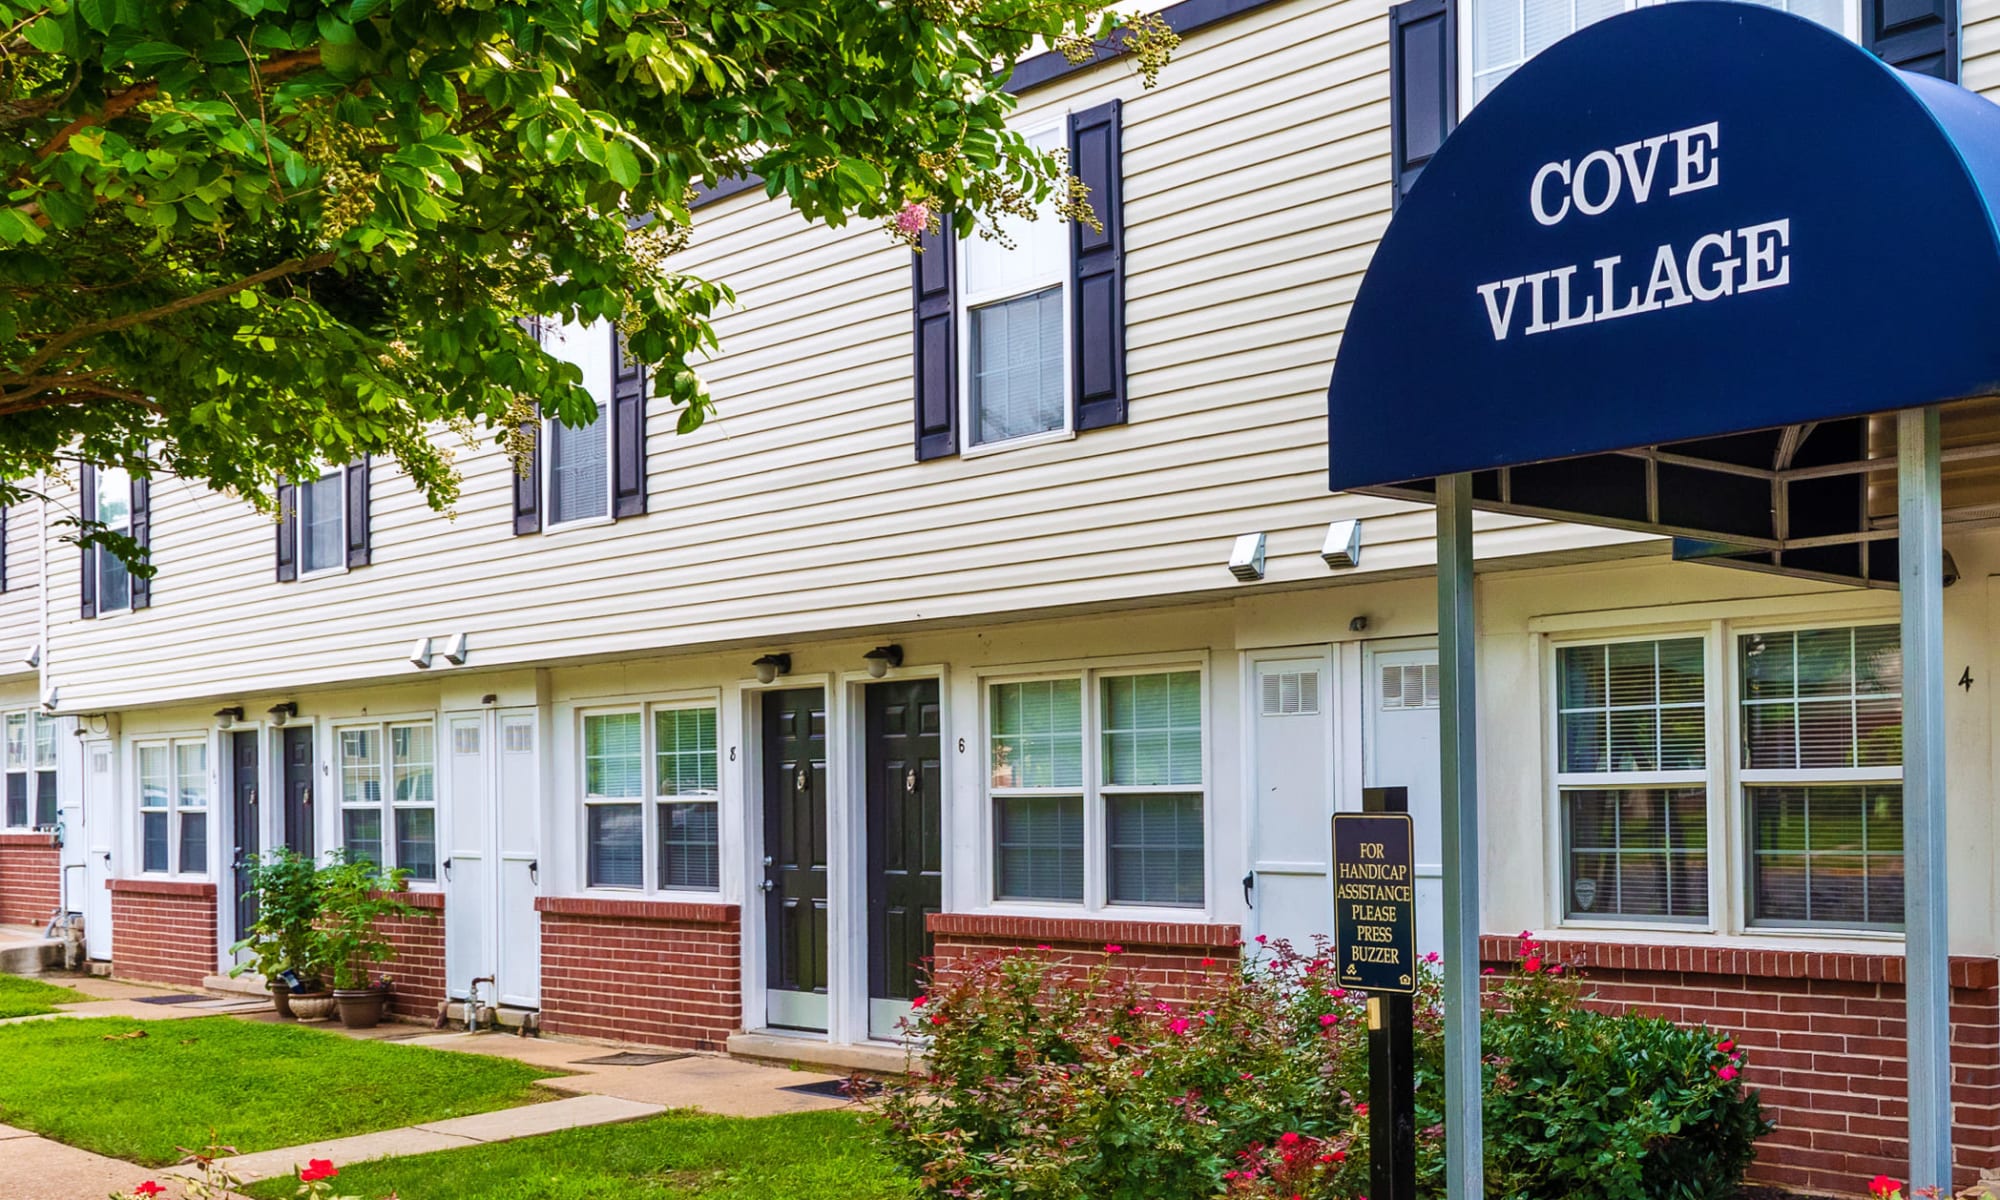 Middleborough Essex Md Townhomes For Rent Cove Village